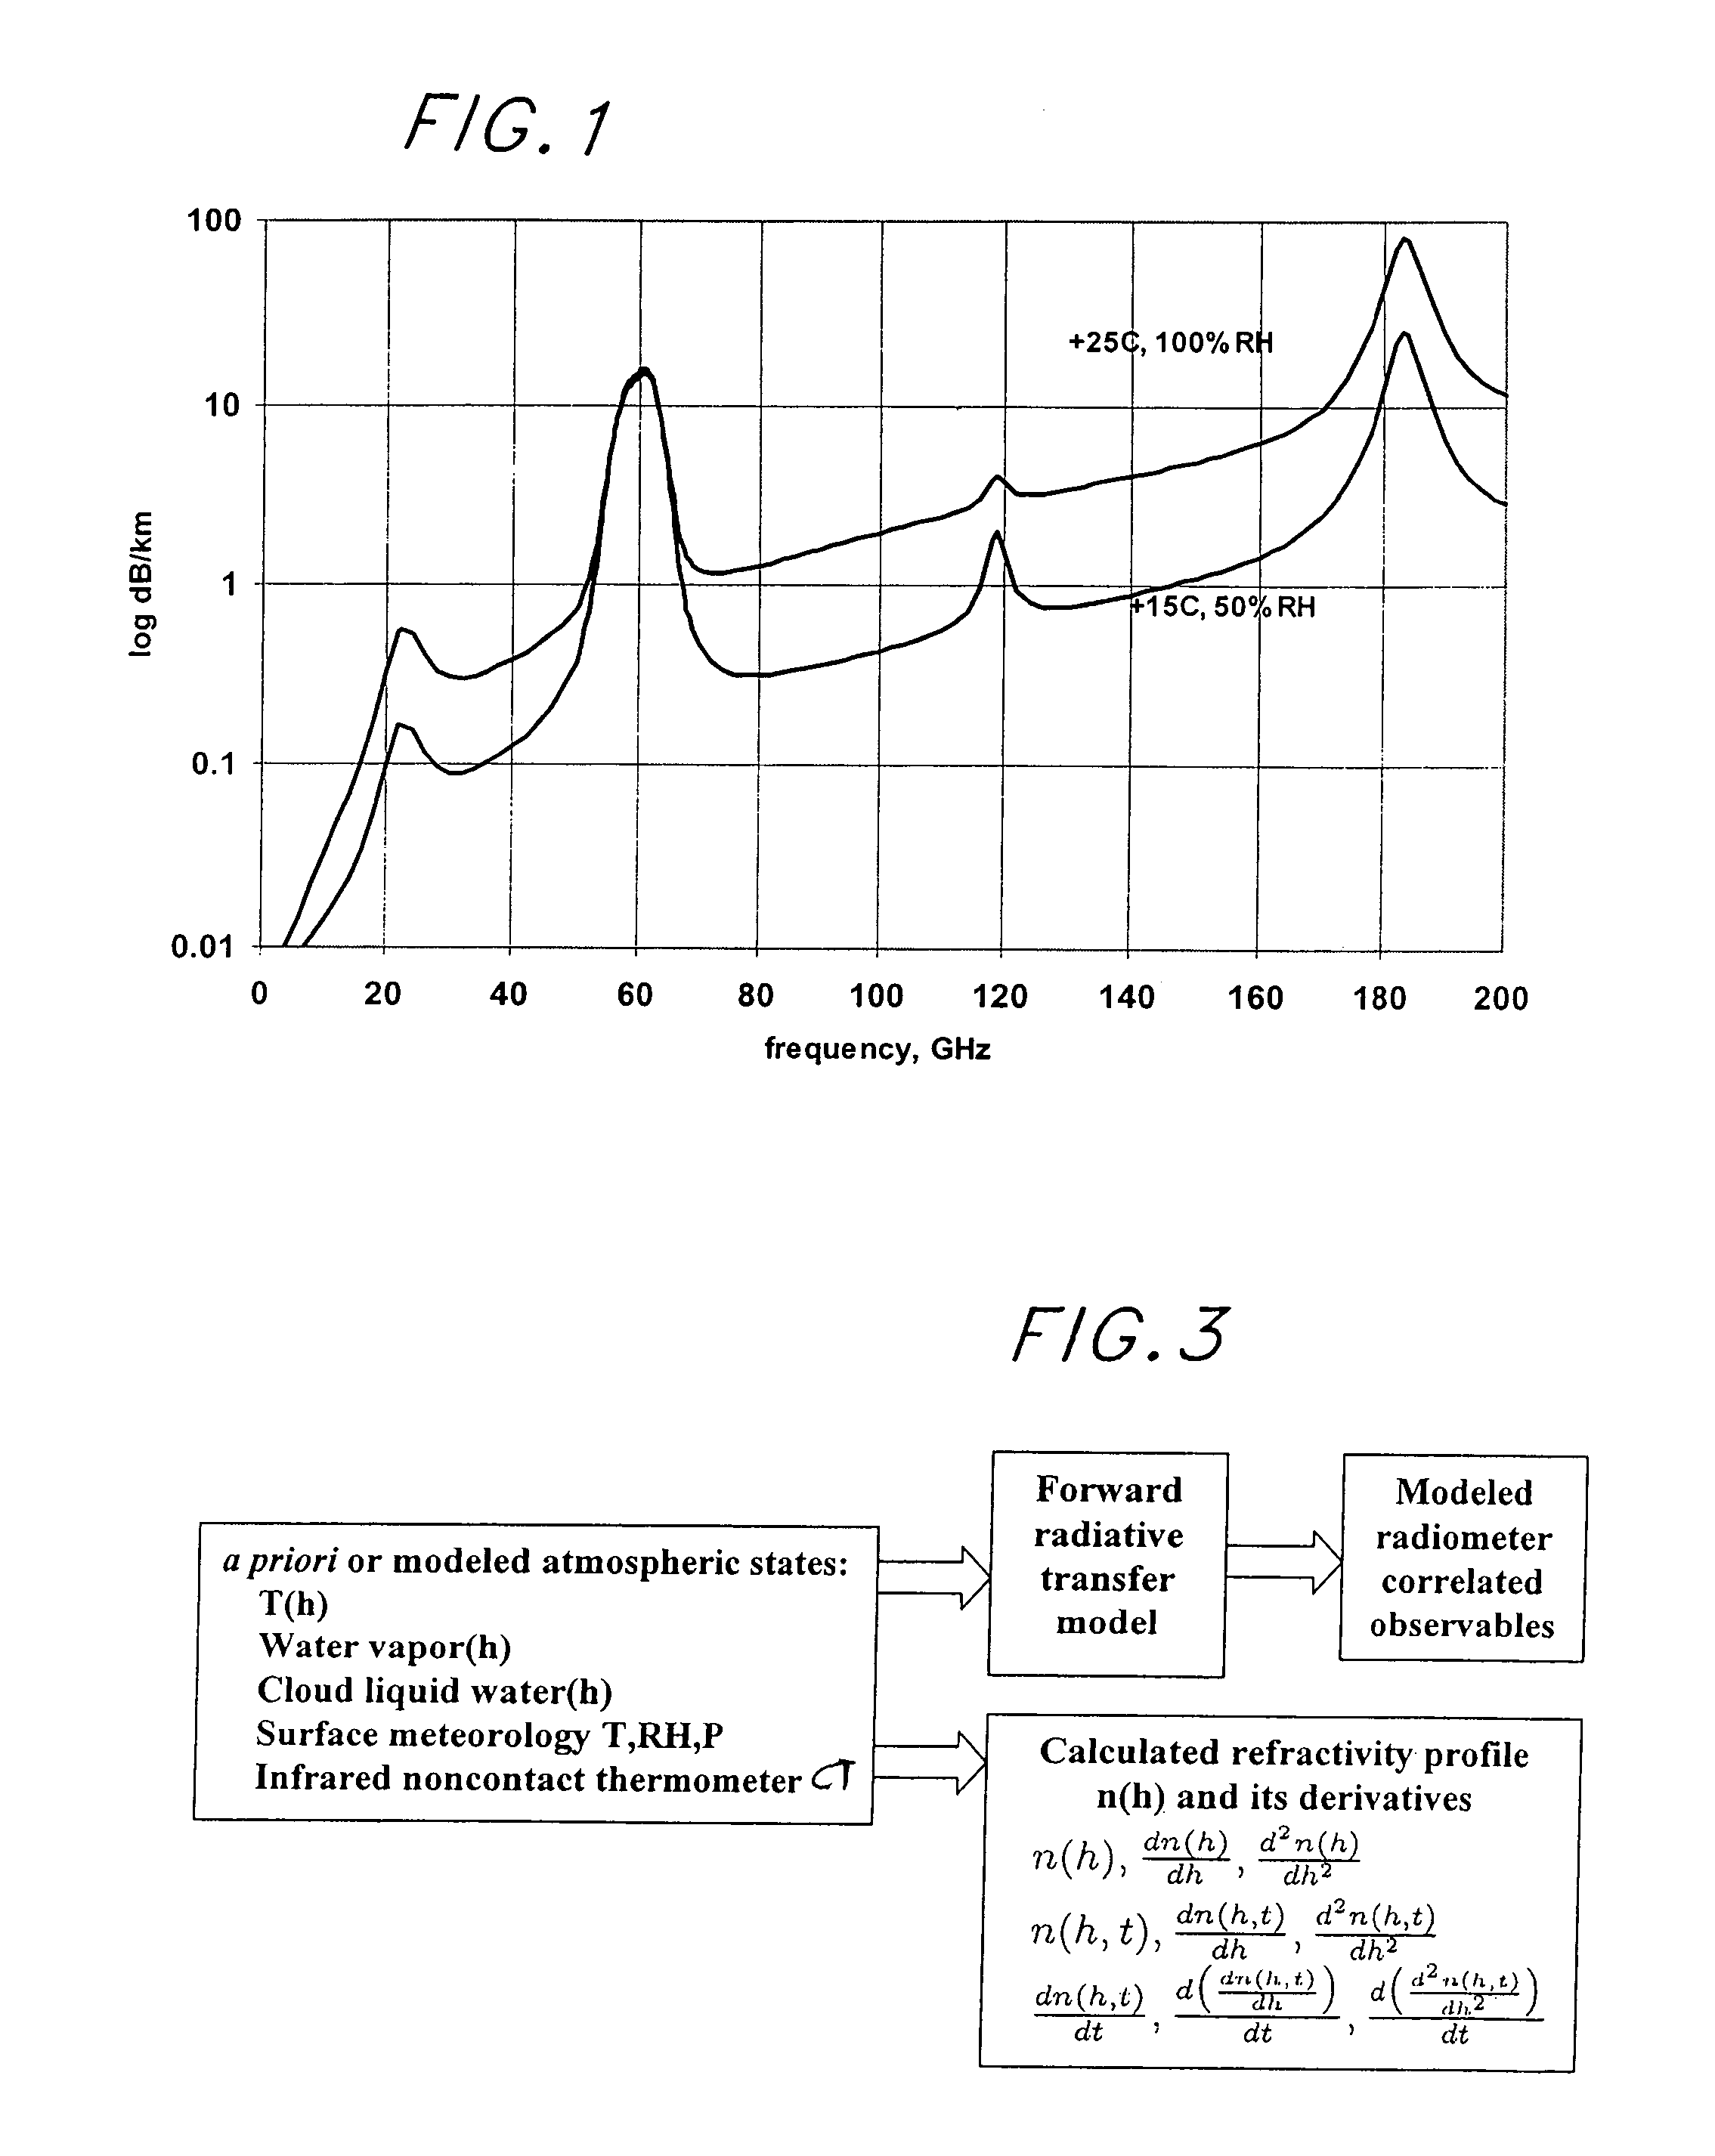 Atmospheric refractivity profiling apparatus and methods